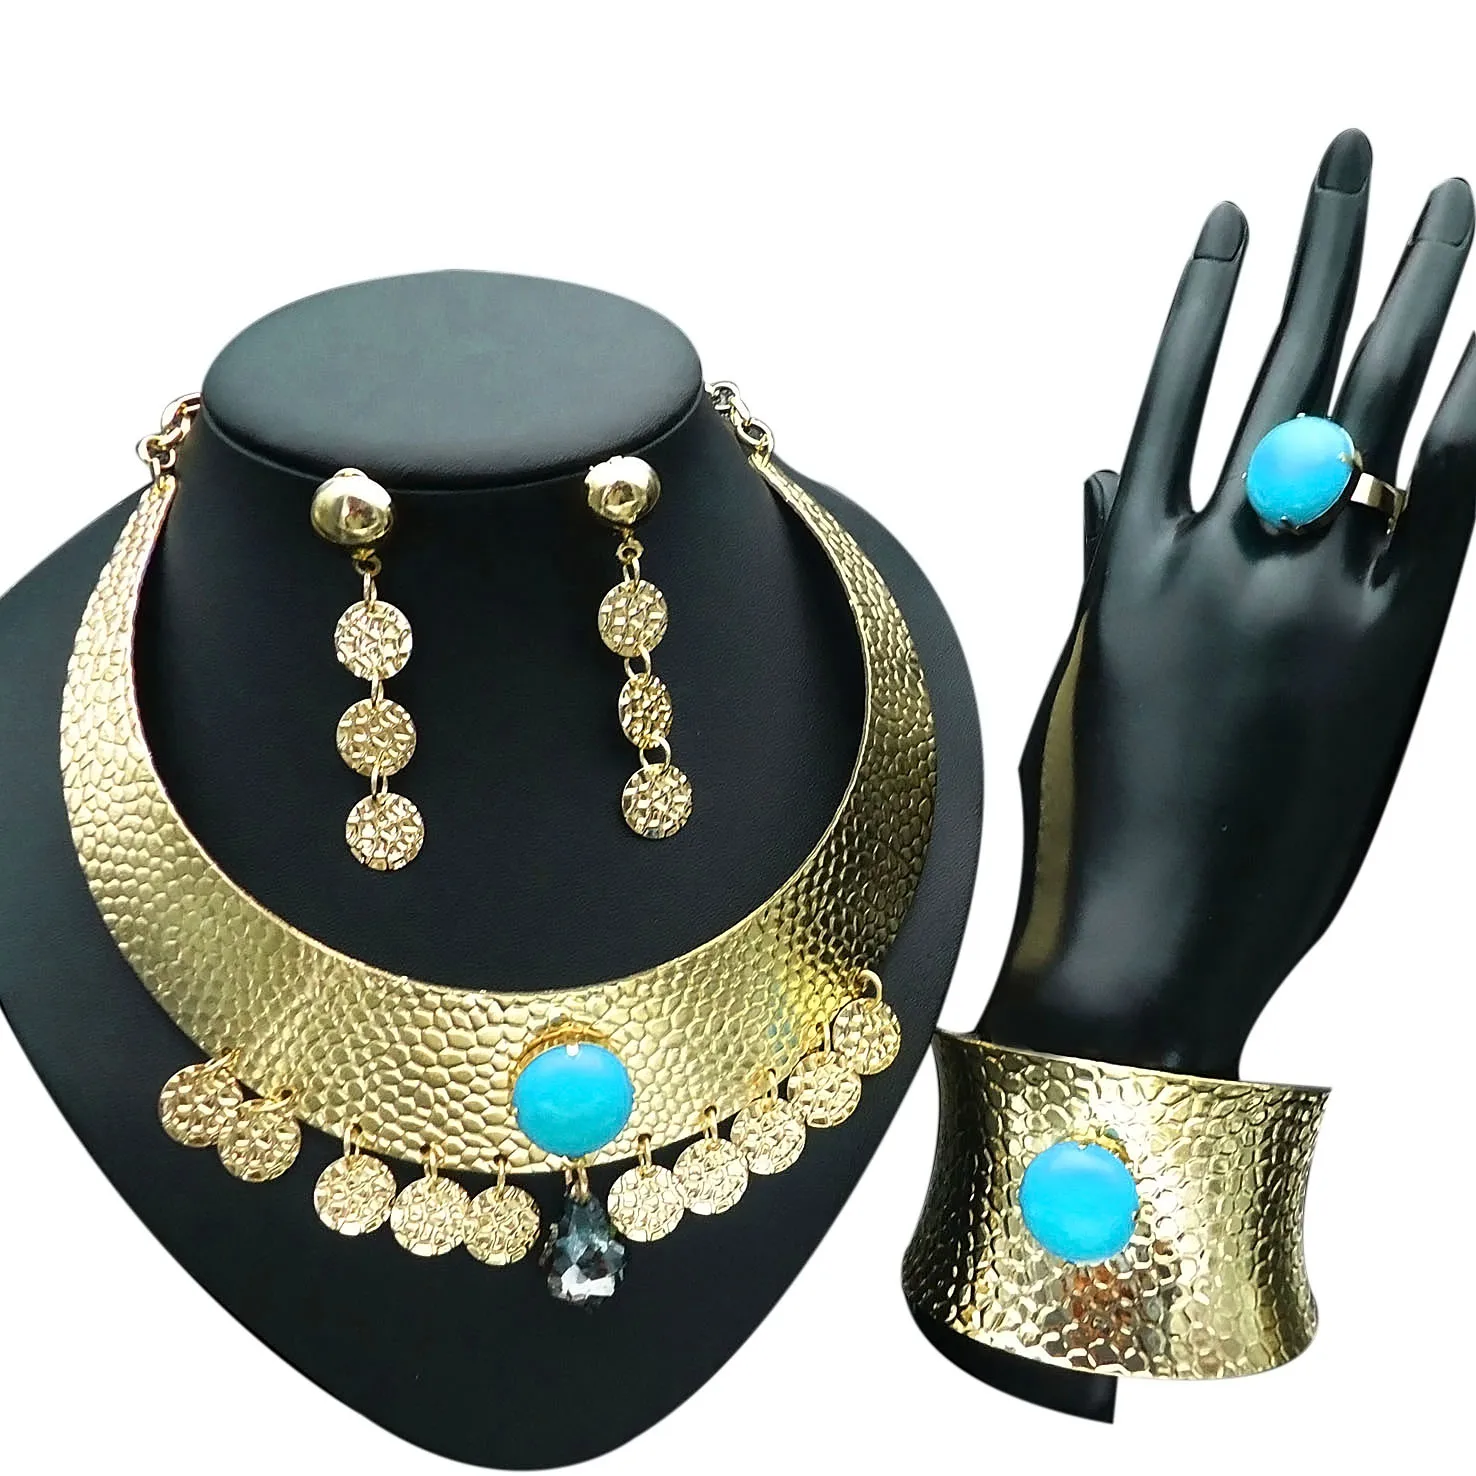 

Yulaili Designed For The Party Romanian Gold Style Necklace Set For Women's Fashionable Available China Beautiful Jewellery Sets